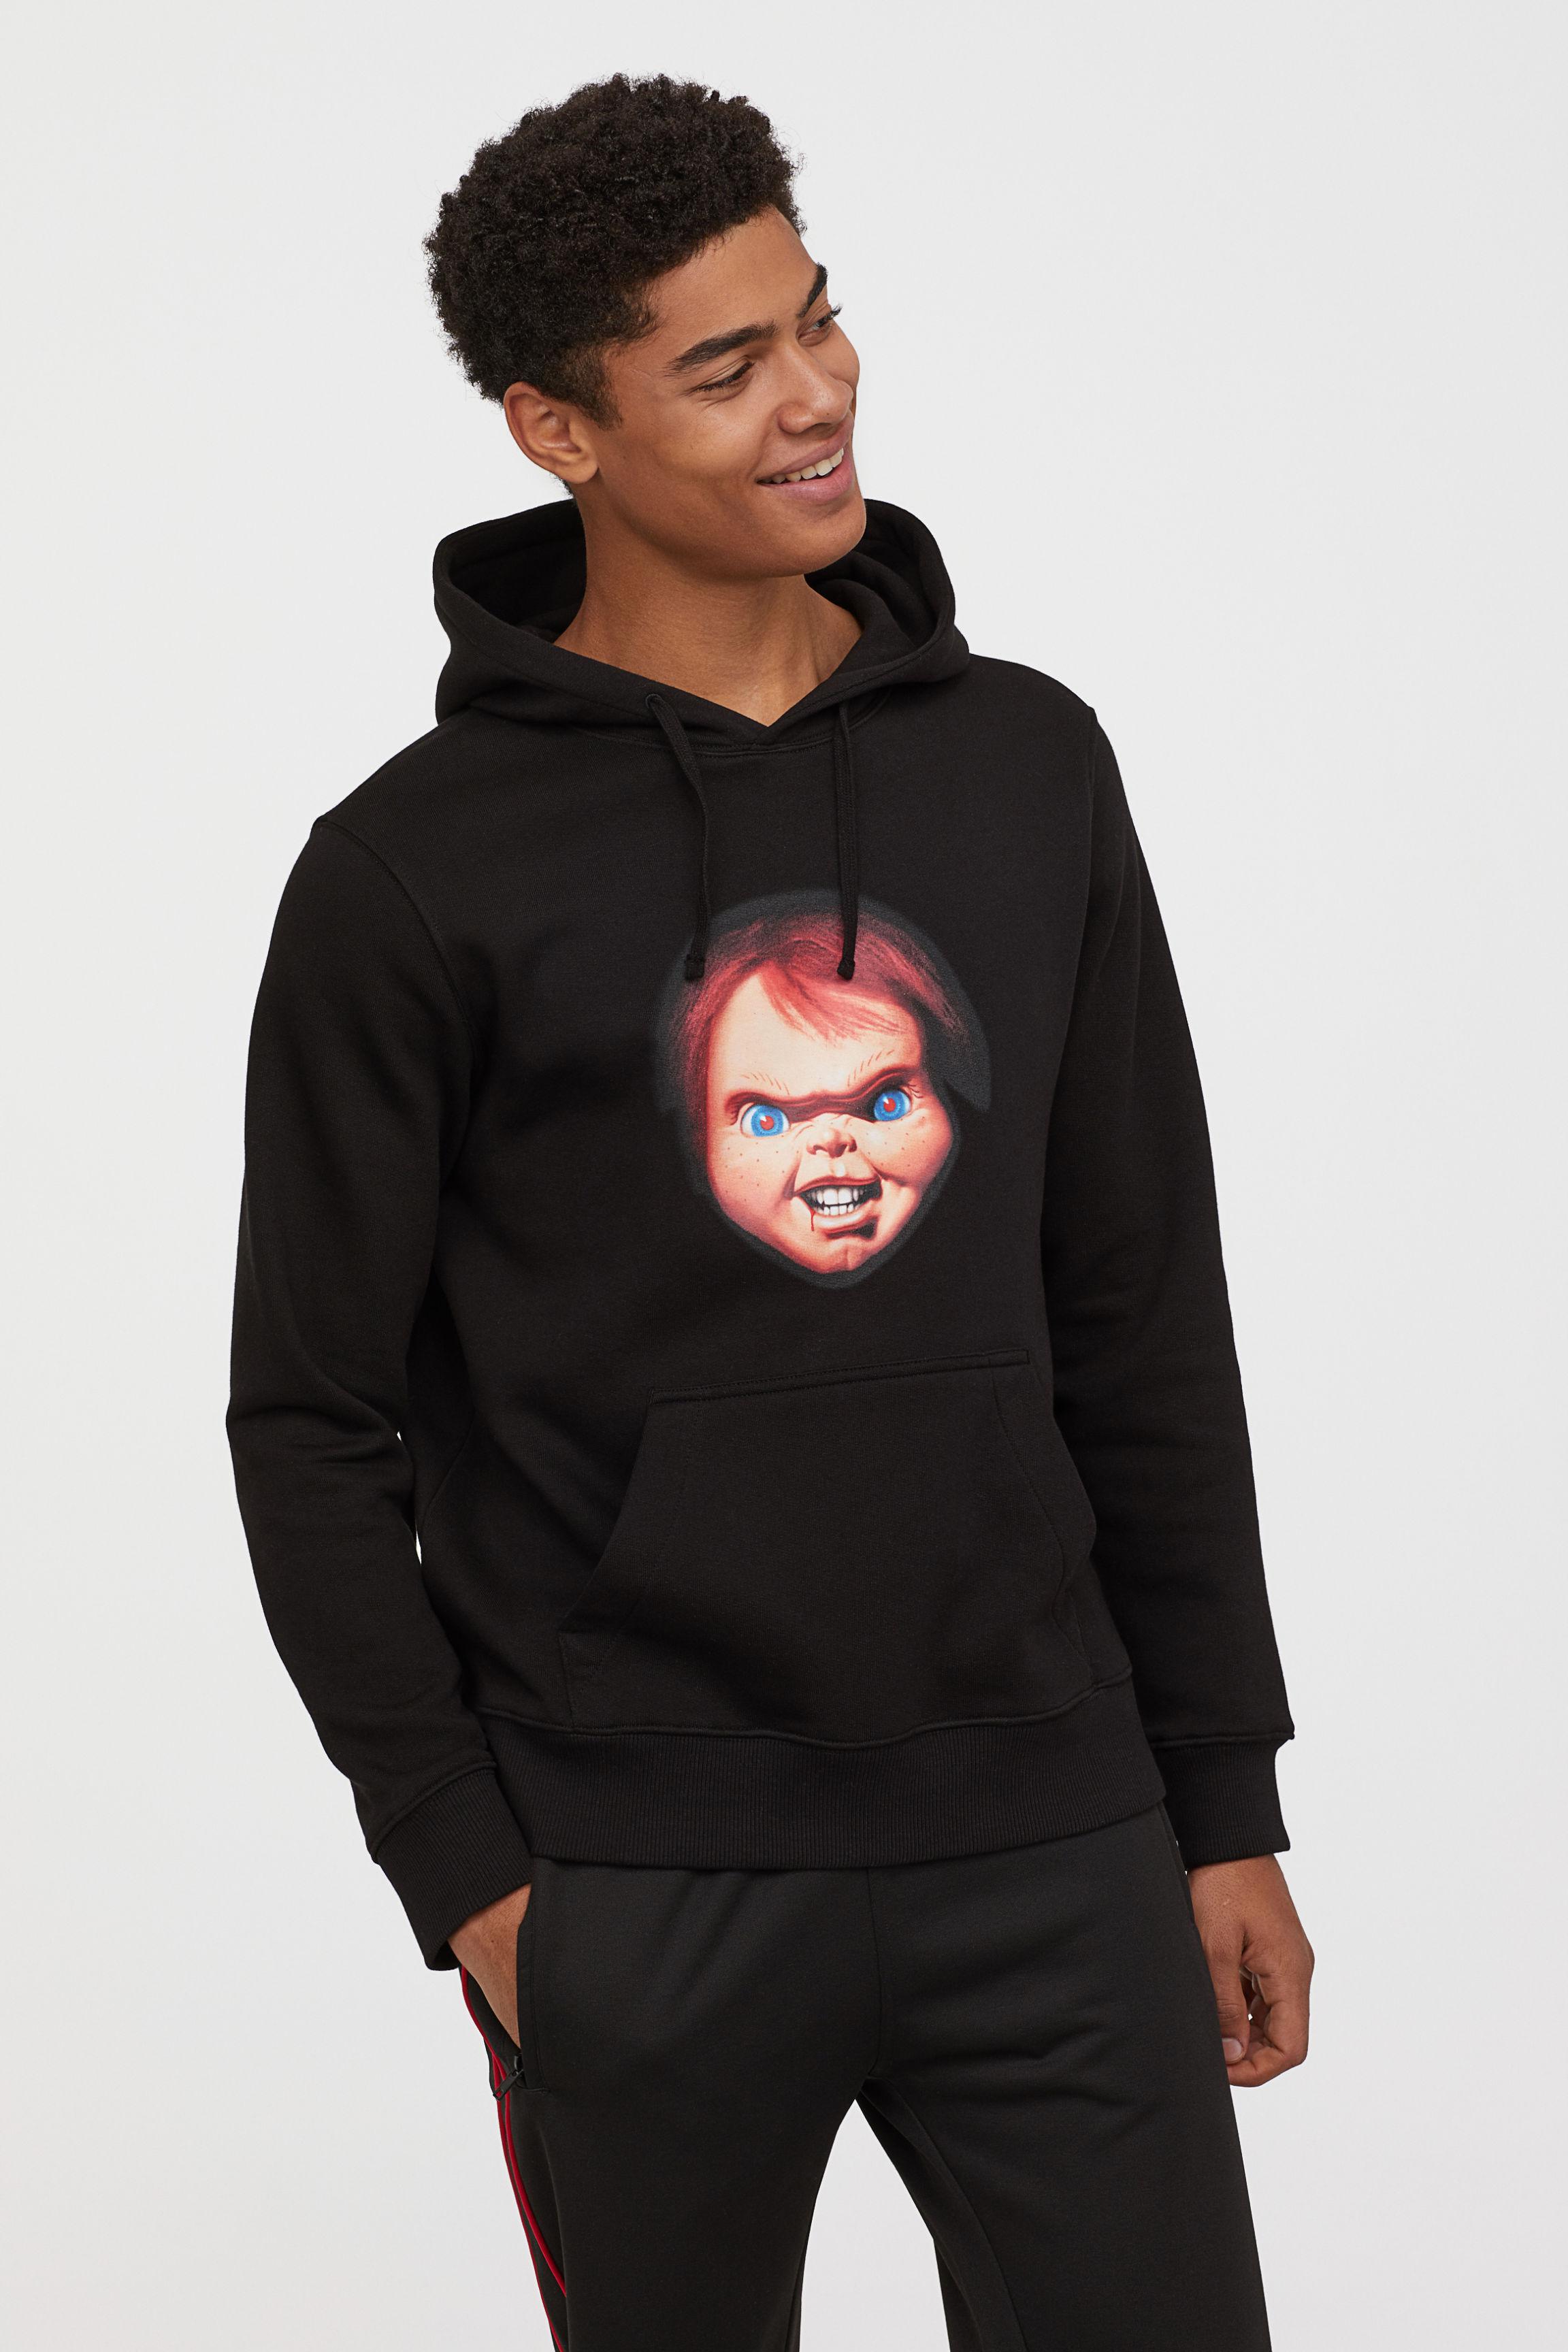 h&m chucky hoodie Shop Clothing & Shoes Online